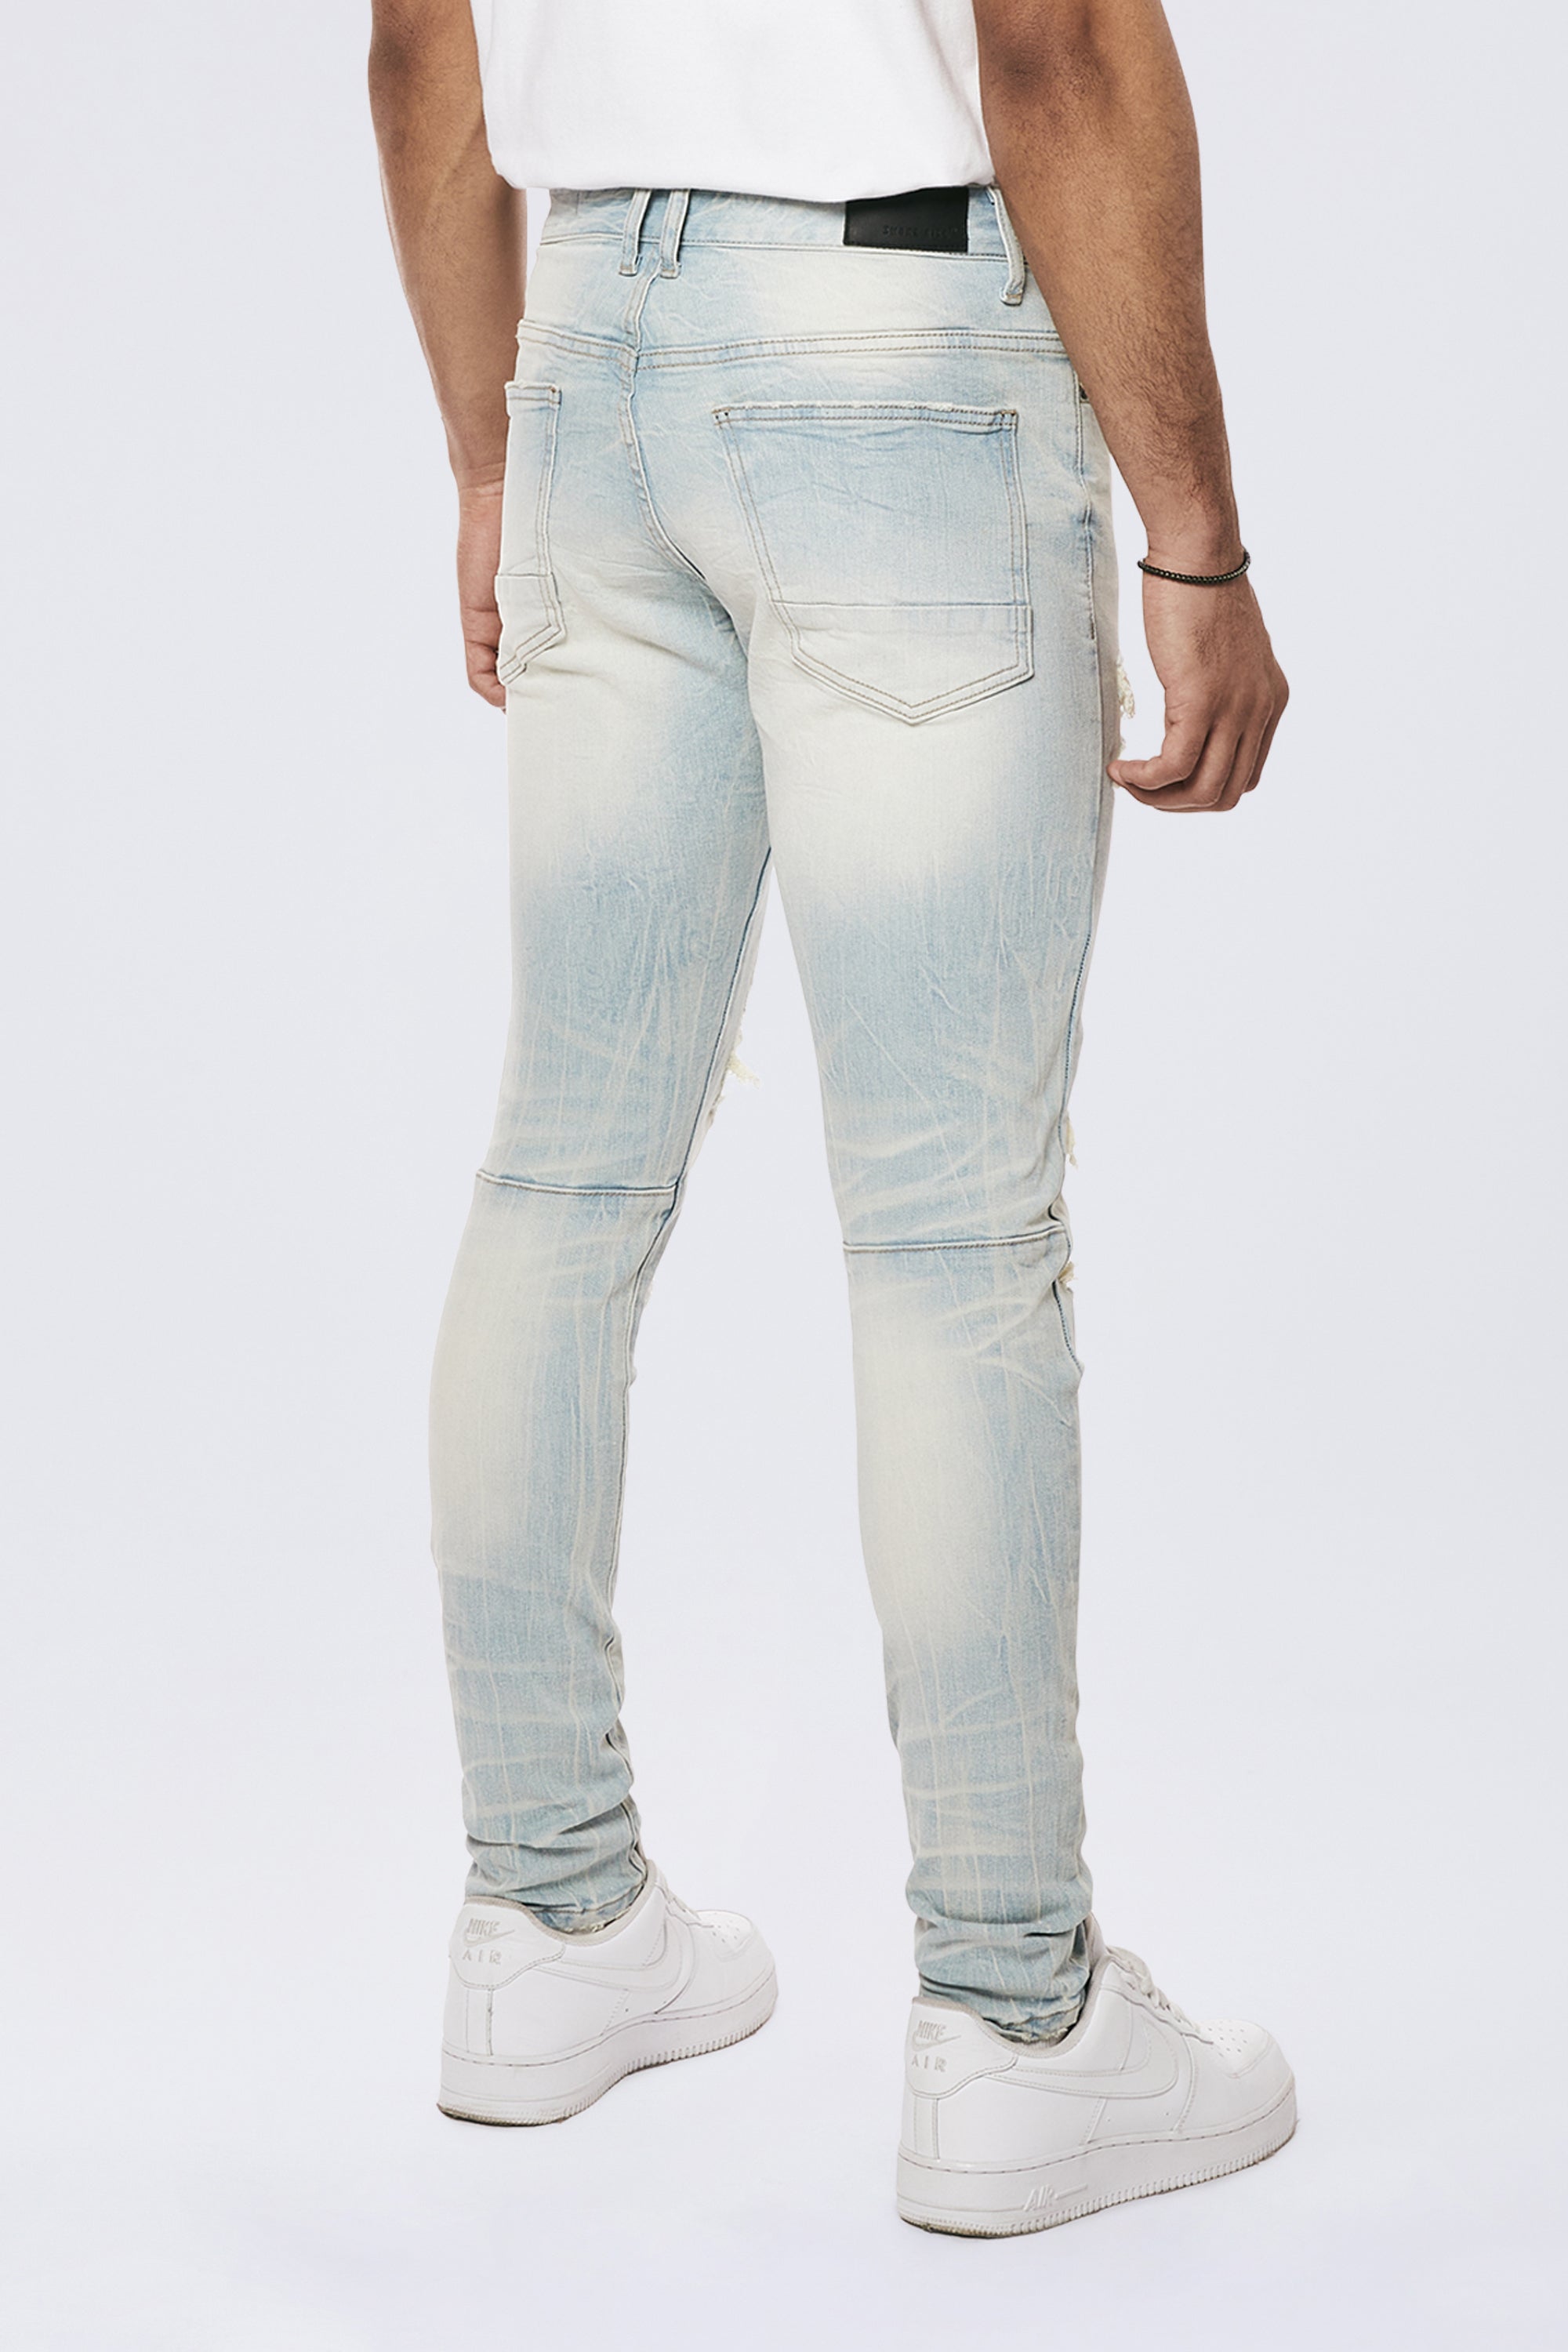 Rip & Repaired Color Slim Tapered Denim Jeans - Speckle Blue